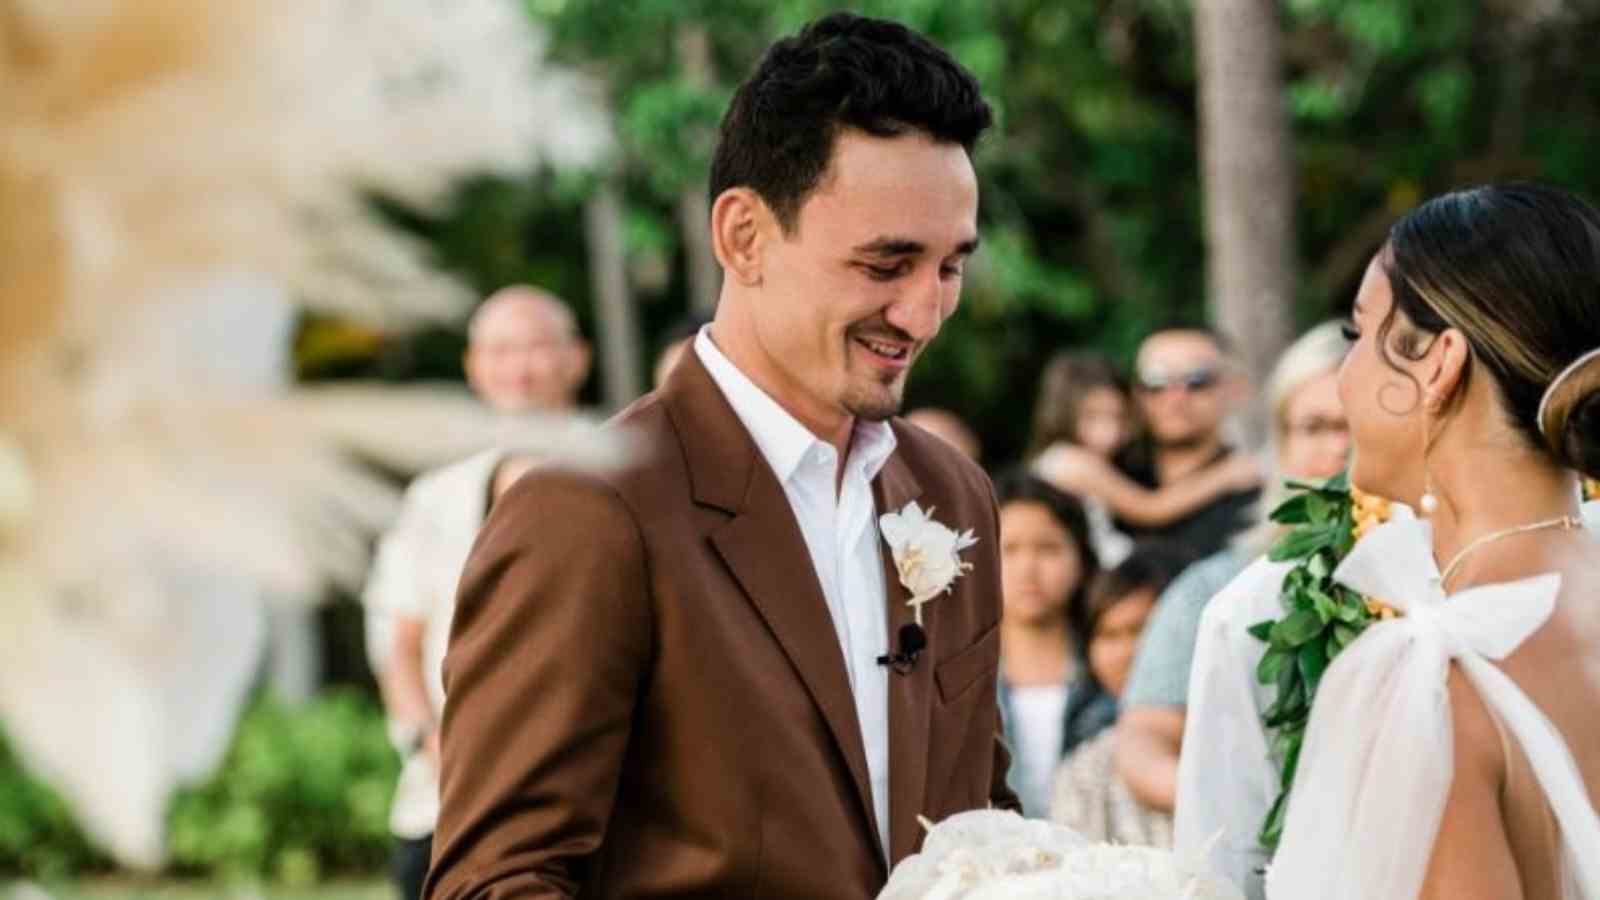 Know everything about Max Holloway's wife, Alessa Quizon, and his